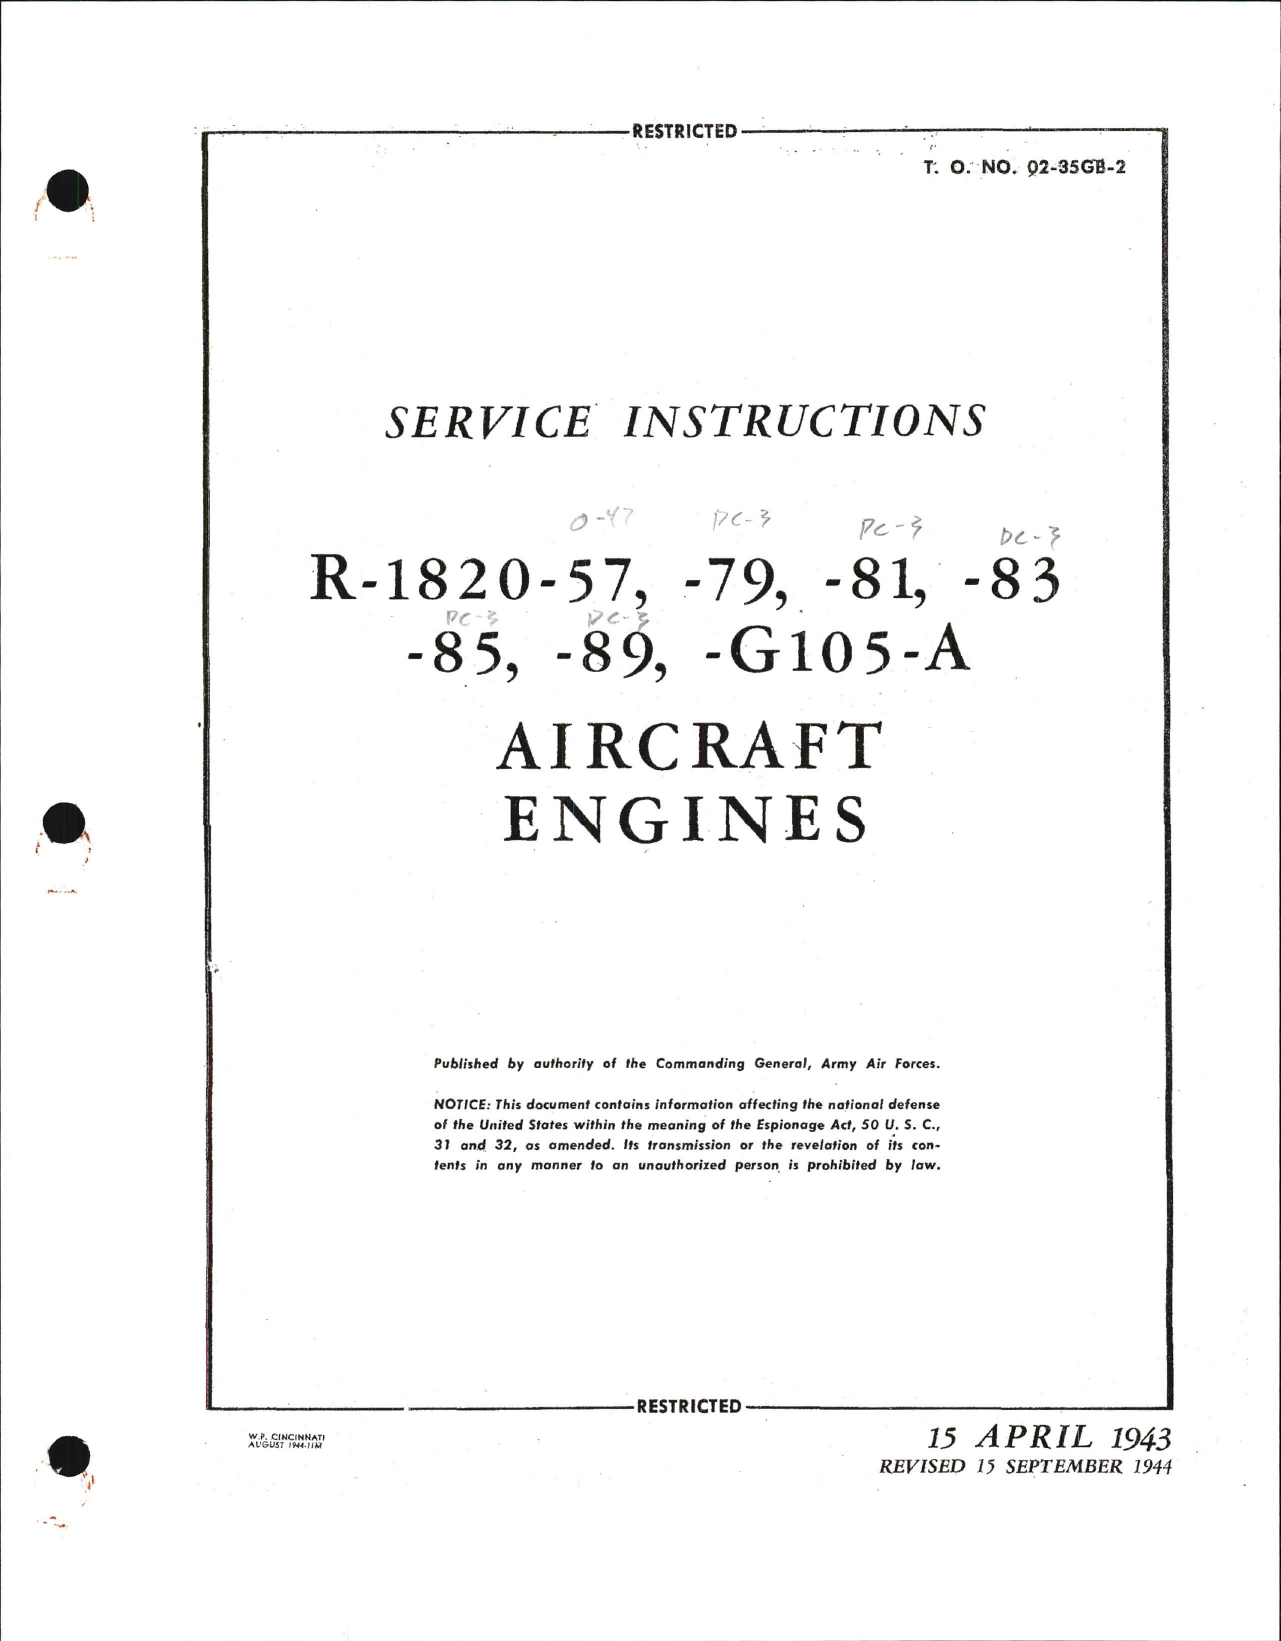 Sample page 1 from AirCorps Library document: Service Instructions for R-1820 Series